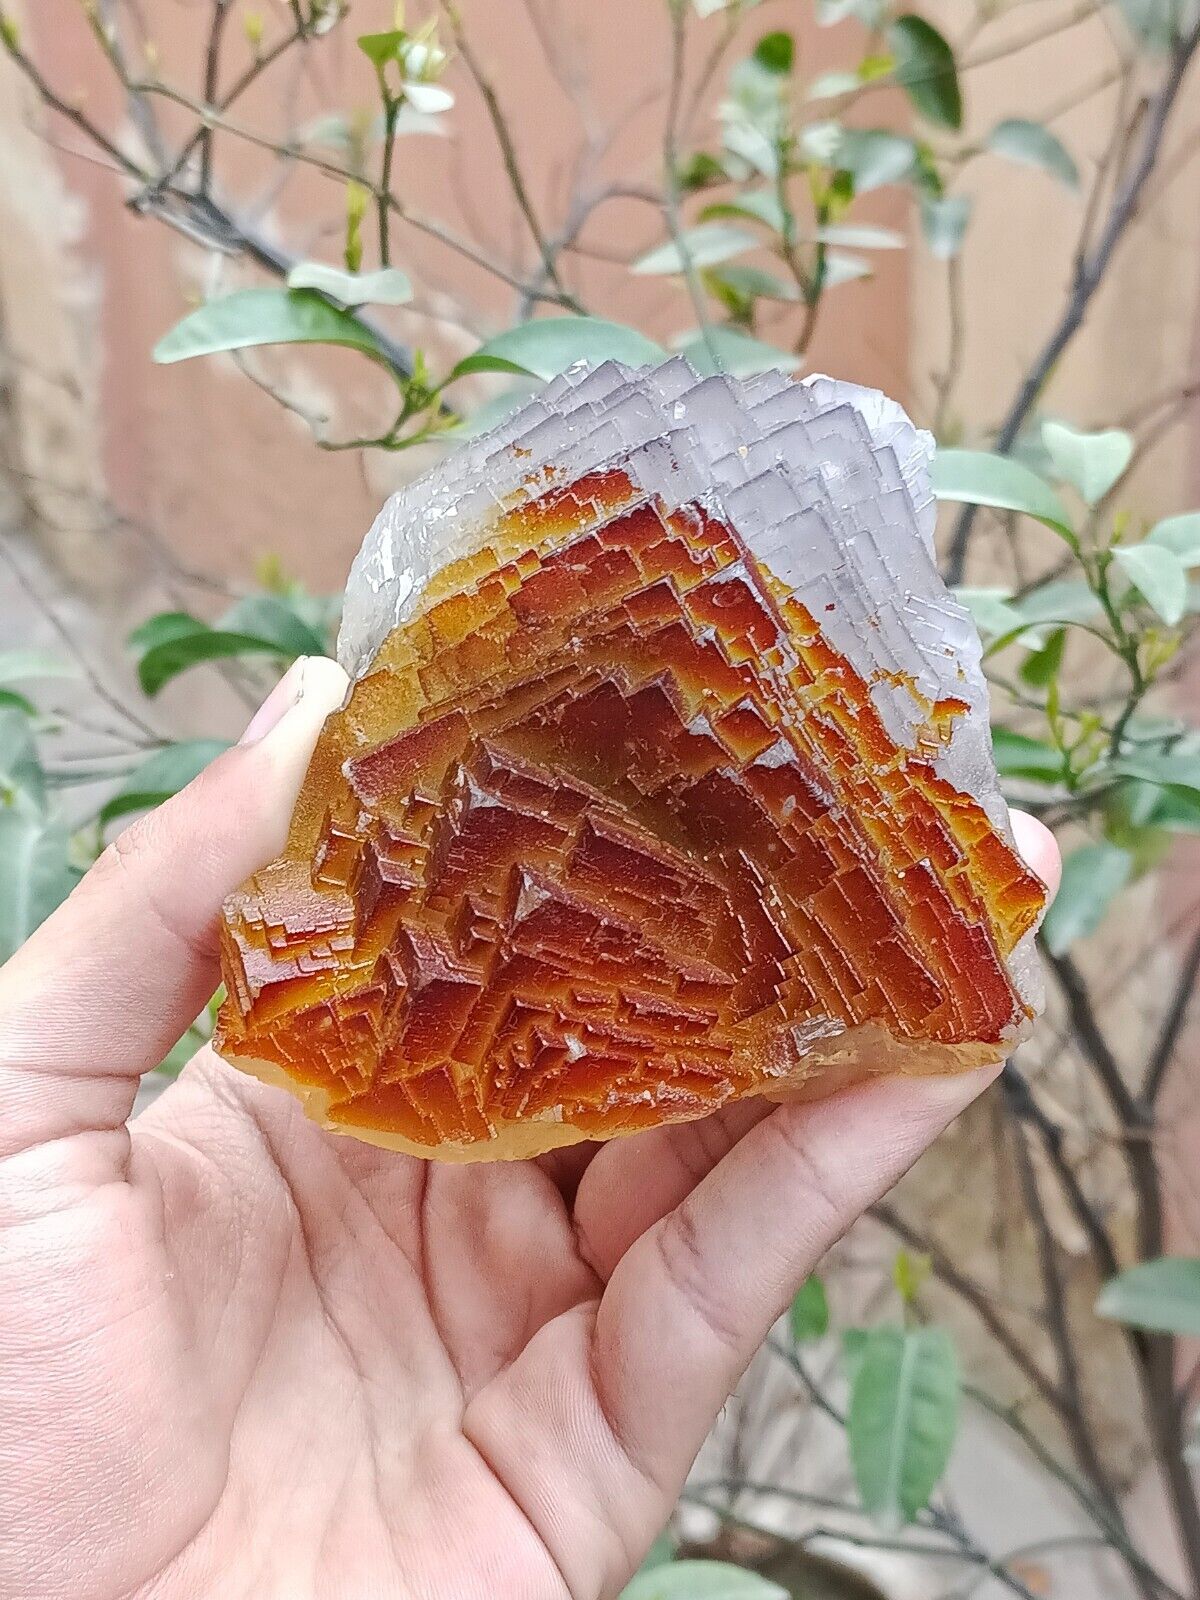 378g Natural Gemstone Fluorite Specimen On Matrix With Red Iron Oxide Inclusions